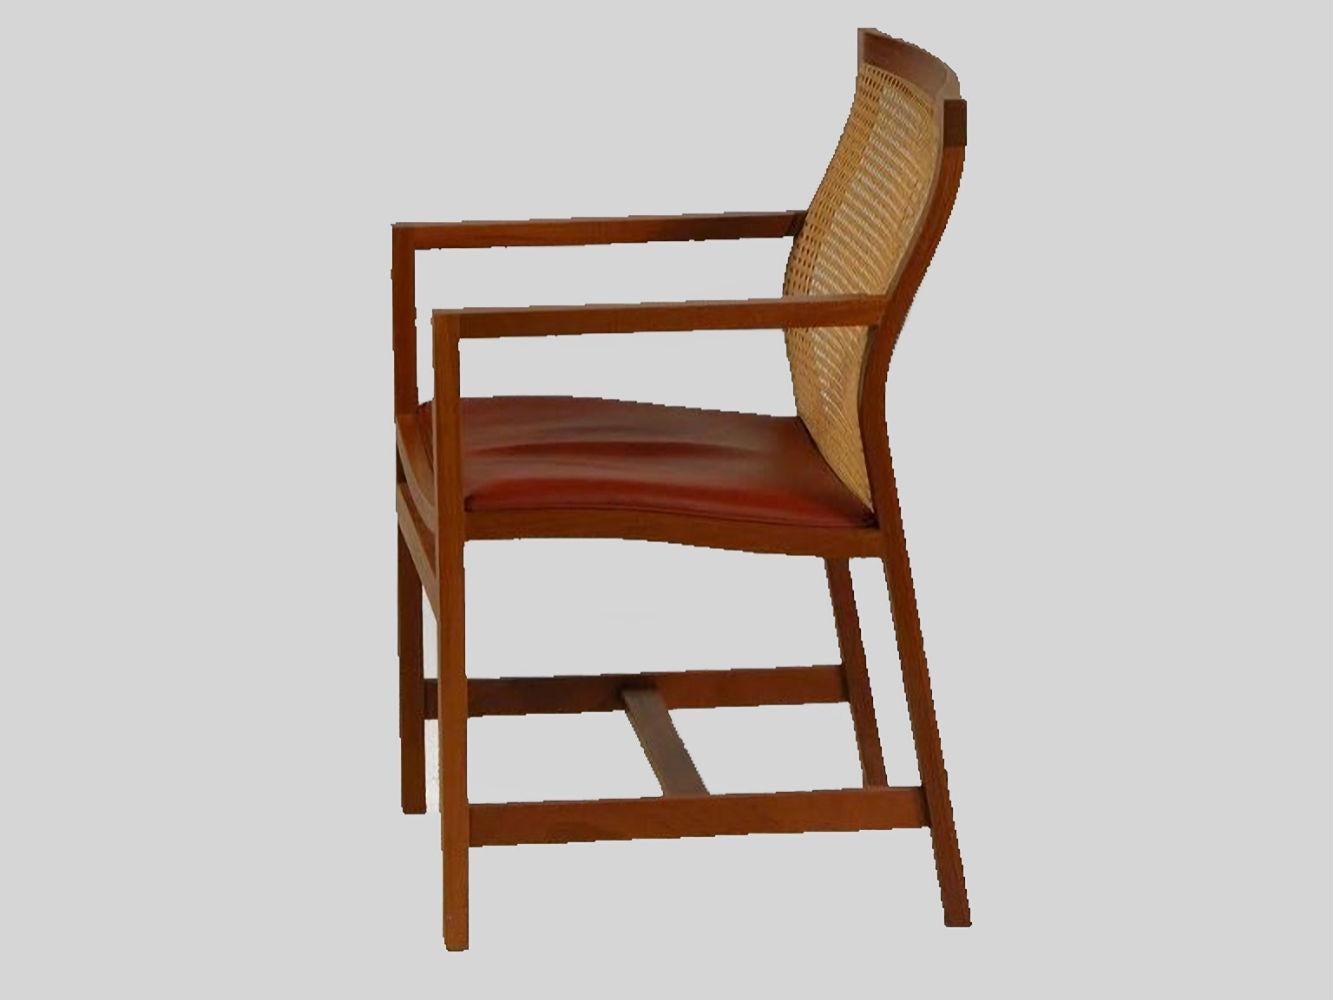 Woodwork 1980s Rud Thygesen and Johnny Sørensen Desk and Chair, Mahogany and Red Leather